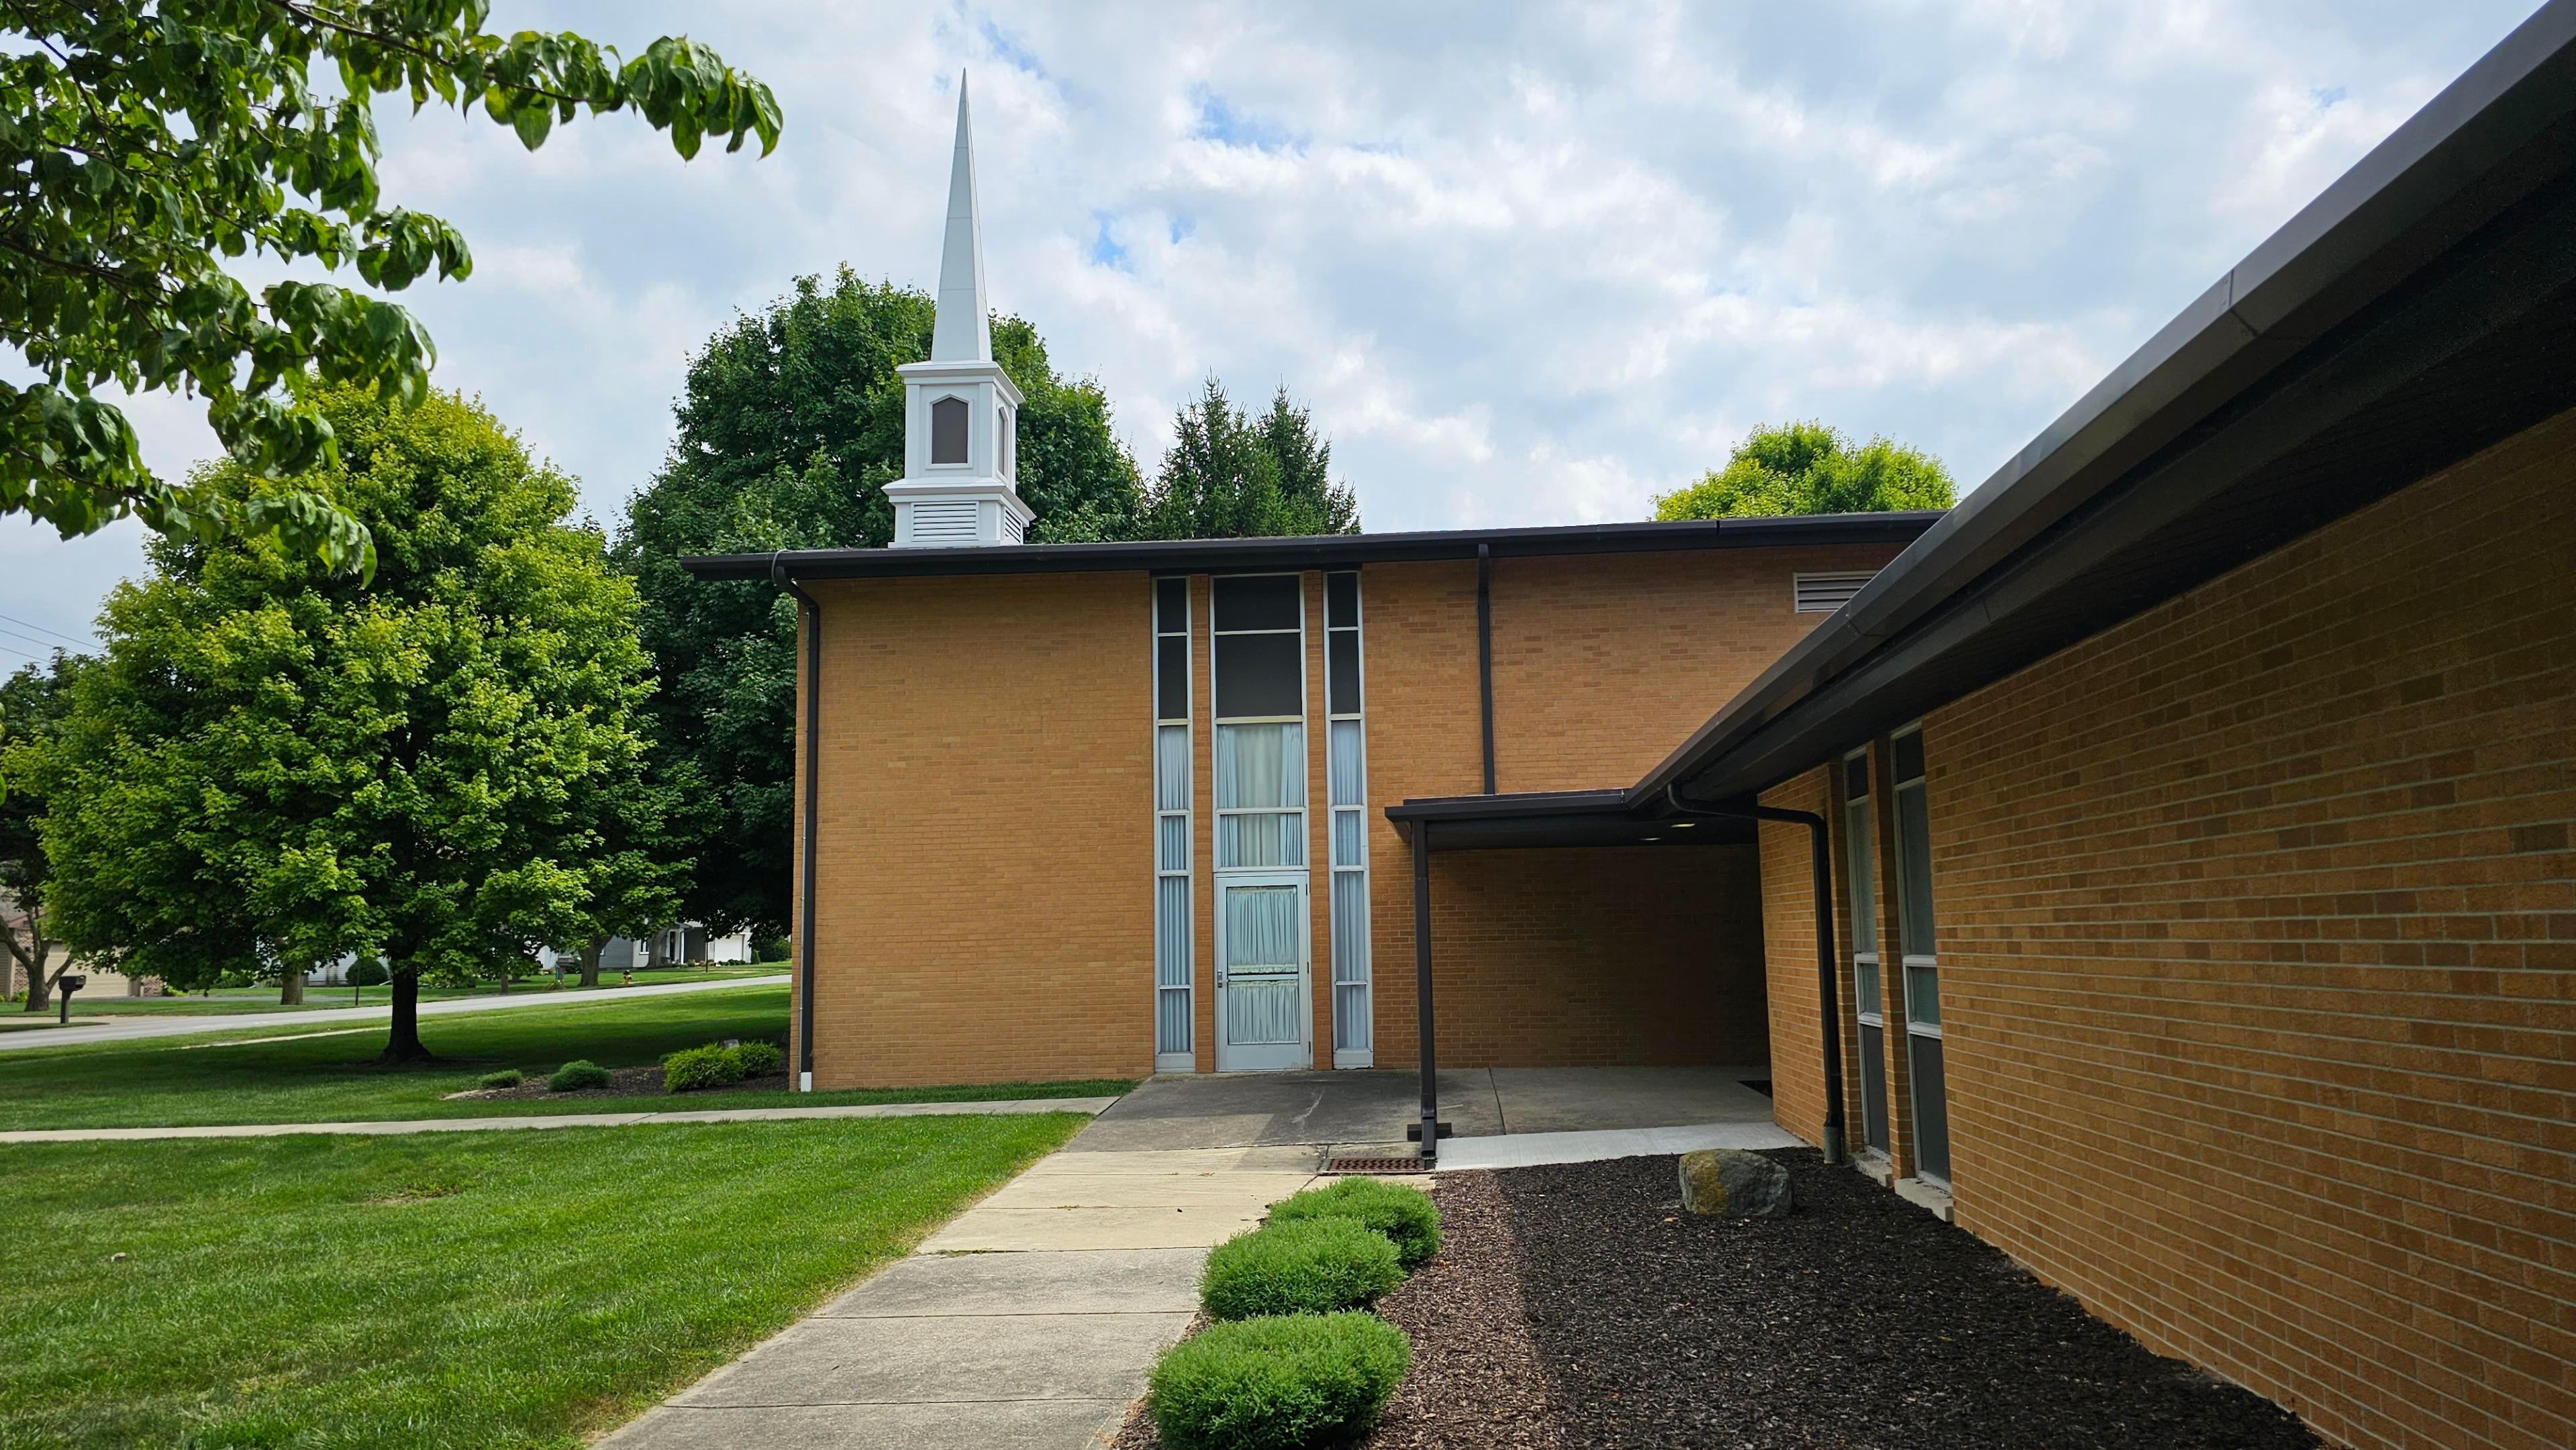 Exterior of the Bowling Green meetinghouse of The Church of Jesus Christ of Latter-day Saints, located at 1033 Conneaut Avenue, Bowling Green, OH 43402.